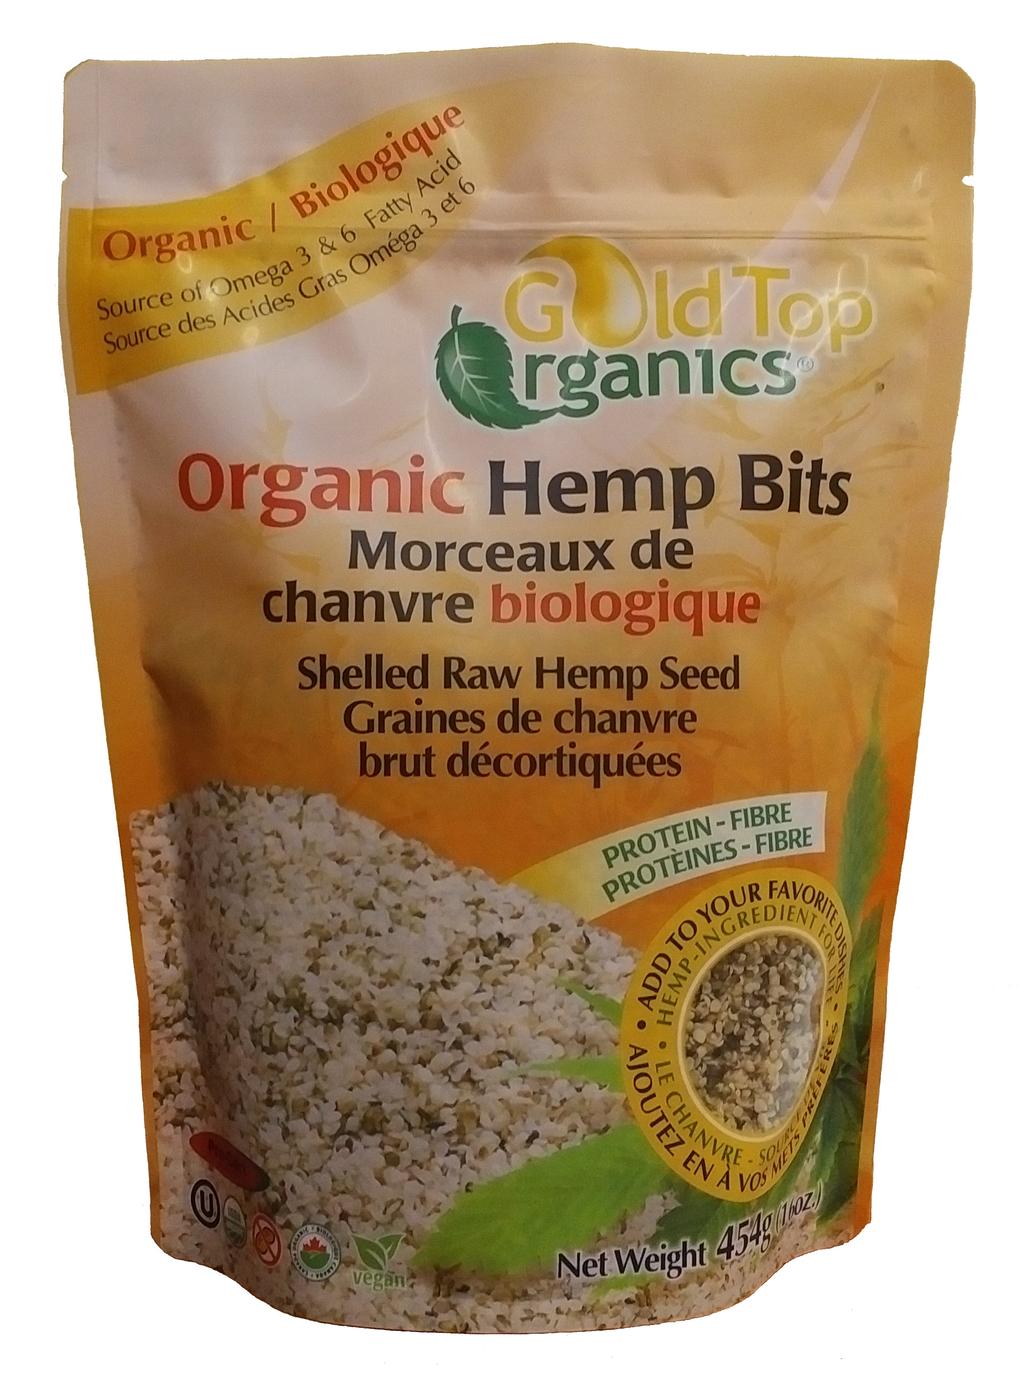 Page # 11 Hemp Products Organic Hulled Hemp Certified organic seed. Made from organic Canadian crop. Non-hydrogenated and trans-fat free. Eating as a snack.